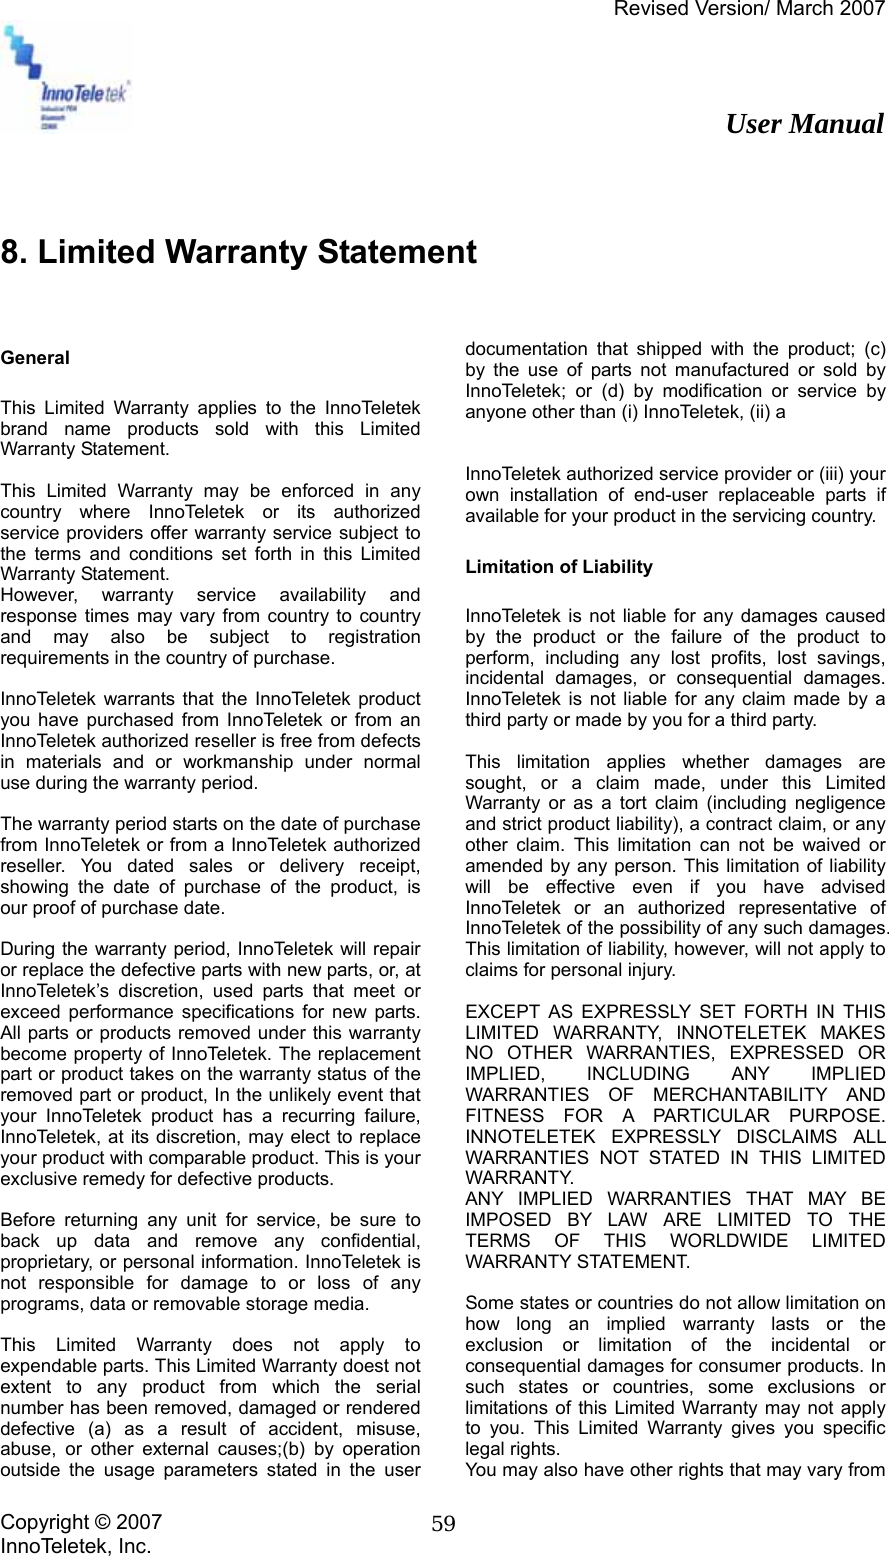 Revised Version/ March 2007                                                          User Manual Copyright © 2007 InnoTeletek, Inc.  59  8. Limited Warranty Statement   General  This Limited Warranty applies to the InnoTeletek brand name products sold with this Limited Warranty Statement.  This Limited Warranty may be enforced in any country where InnoTeletek or its authorized service providers offer warranty service subject to the terms and conditions set forth in this Limited Warranty Statement. However, warranty service availability and response times may vary from country to country and may also be subject to registration requirements in the country of purchase.  InnoTeletek warrants that the InnoTeletek product you have purchased from InnoTeletek or from an InnoTeletek authorized reseller is free from defects in materials and or workmanship under normal use during the warranty period.  The warranty period starts on the date of purchase from InnoTeletek or from a InnoTeletek authorized reseller. You dated sales or delivery receipt, showing the date of purchase of the product, is our proof of purchase date.  During the warranty period, InnoTeletek will repair or replace the defective parts with new parts, or, at InnoTeletek’s discretion, used parts that meet or exceed performance specifications for new parts. All parts or products removed under this warranty become property of InnoTeletek. The replacement part or product takes on the warranty status of the removed part or product, In the unlikely event that your InnoTeletek product has a recurring failure, InnoTeletek, at its discretion, may elect to replace your product with comparable product. This is your exclusive remedy for defective products.  Before returning any unit for service, be sure to back up data and remove any confidential, proprietary, or personal information. InnoTeletek is not responsible for damage to or loss of any programs, data or removable storage media.  This Limited Warranty does not apply to expendable parts. This Limited Warranty doest not extent to any product from which the serial number has been removed, damaged or rendered defective (a) as a result of accident, misuse, abuse, or other external causes;(b) by operation outside the usage parameters stated in the user documentation that shipped with the product; (c) by the use of parts not manufactured or sold by InnoTeletek; or (d) by modification or service by anyone other than (i) InnoTeletek, (ii) a     InnoTeletek authorized service provider or (iii) your own installation of end-user replaceable parts if available for your product in the servicing country.  Limitation of Liability  InnoTeletek is not liable for any damages caused by the product or the failure of the product to perform, including any lost profits, lost savings, incidental damages, or consequential damages. InnoTeletek is not liable for any claim made by a third party or made by you for a third party.  This limitation applies whether damages are sought, or a claim made, under this Limited Warranty or as a tort claim (including negligence and strict product liability), a contract claim, or any other claim. This limitation can not be waived or amended by any person. This limitation of liability will be effective even if you have advised InnoTeletek or an authorized representative of InnoTeletek of the possibility of any such damages. This limitation of liability, however, will not apply to claims for personal injury.  EXCEPT AS EXPRESSLY SET FORTH IN THIS LIMITED WARRANTY, INNOTELETEK MAKES NO OTHER WARRANTIES, EXPRESSED OR IMPLIED, INCLUDING ANY IMPLIED WARRANTIES OF MERCHANTABILITY AND FITNESS FOR A PARTICULAR PURPOSE. INNOTELETEK EXPRESSLY DISCLAIMS ALL WARRANTIES NOT STATED IN THIS LIMITED WARRANTY. ANY IMPLIED WARRANTIES THAT MAY BE IMPOSED BY LAW ARE LIMITED TO THE TERMS OF THIS WORLDWIDE LIMITED WARRANTY STATEMENT.  Some states or countries do not allow limitation on how long an implied warranty lasts or the exclusion or limitation of the incidental or consequential damages for consumer products. In such states or countries, some exclusions or limitations of this Limited Warranty may not apply to you. This Limited Warranty gives you specific legal rights. You may also have other rights that may vary from 